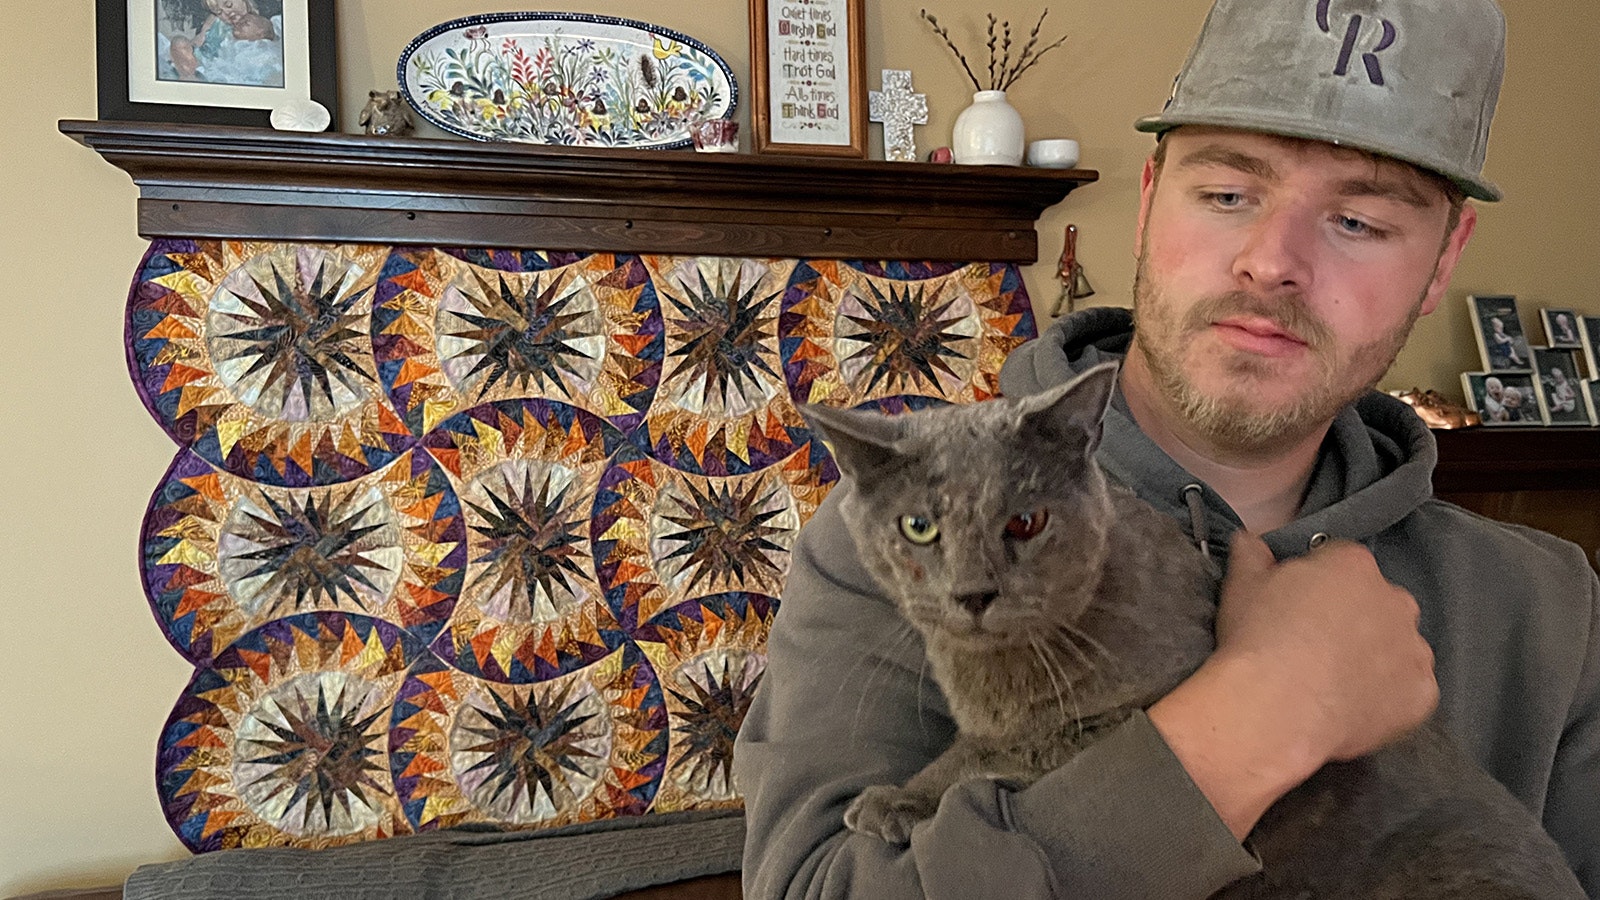 Jacob Lee of Cheyenne holds his cat Walter, which was tortured and shot 19 times with a pellet gun. The cat is recovering, but is blind in its left eye now and still has the pellets in him.